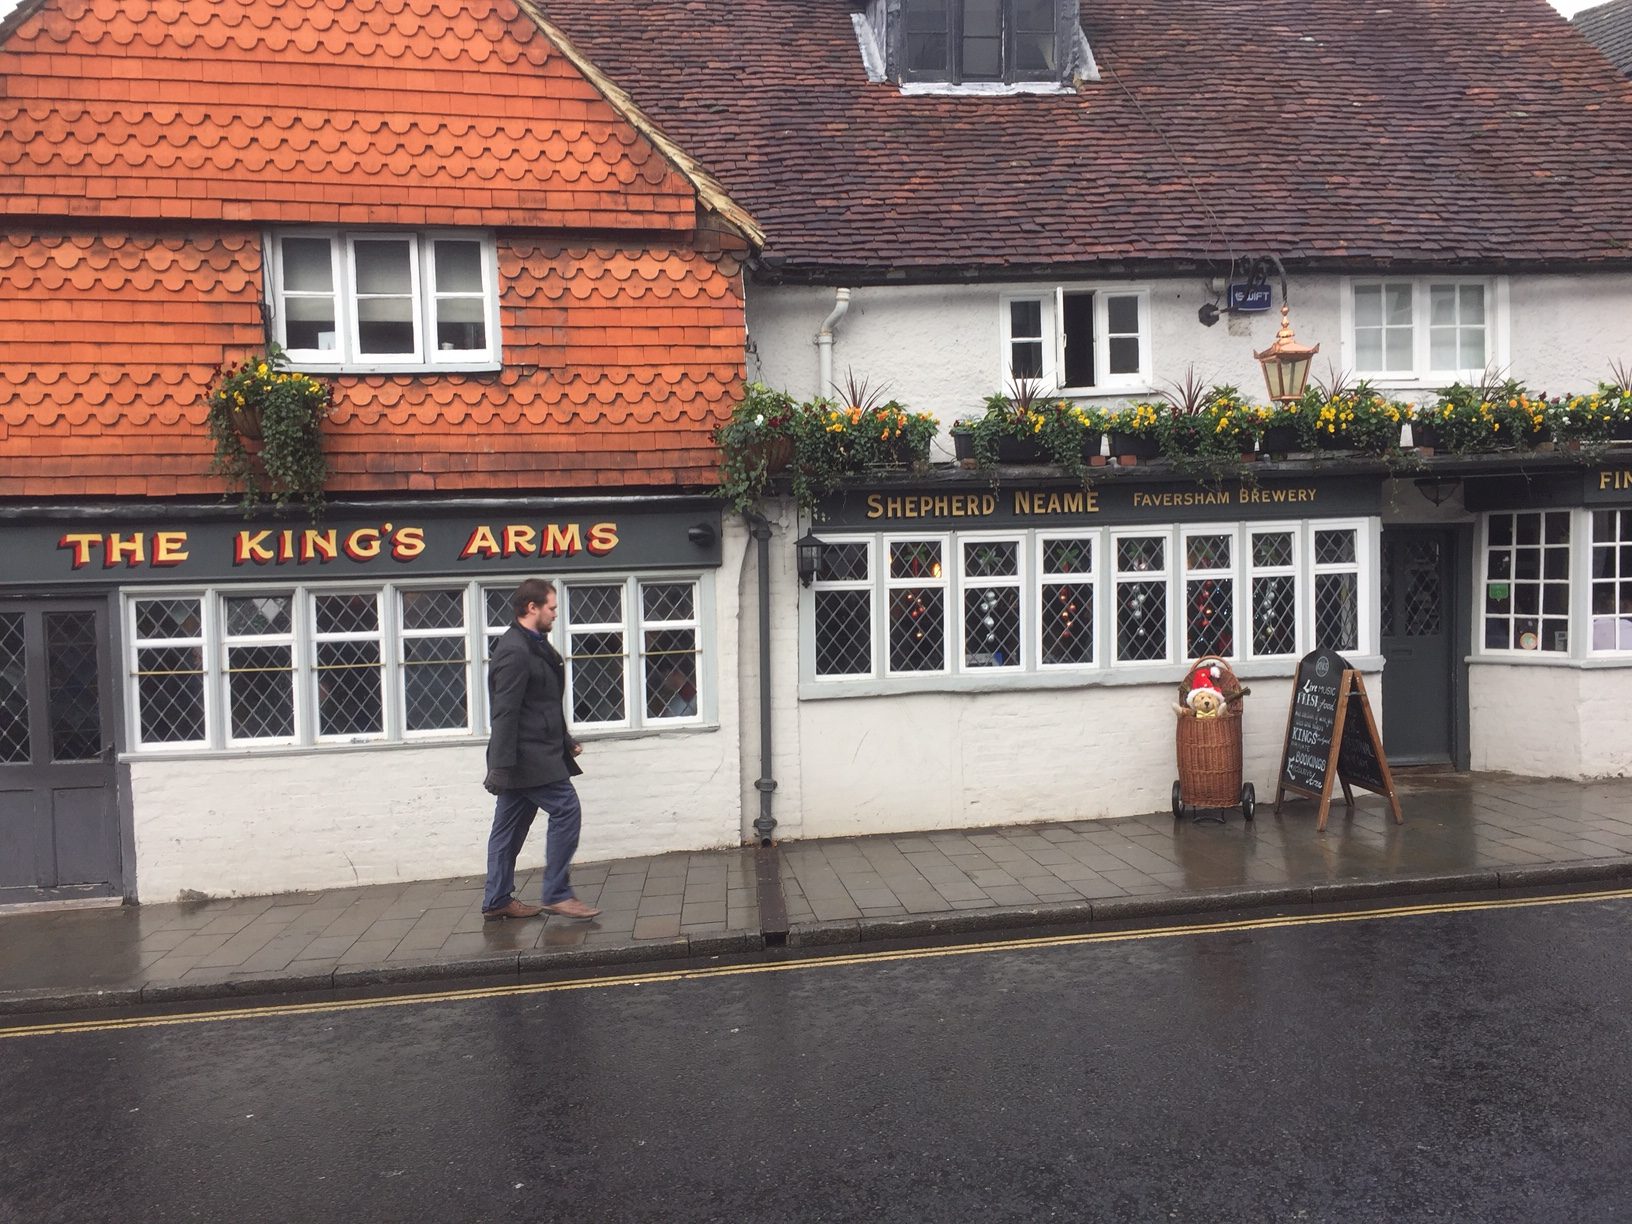 Old Bears - West Street, Dorking. The Kings Arms.